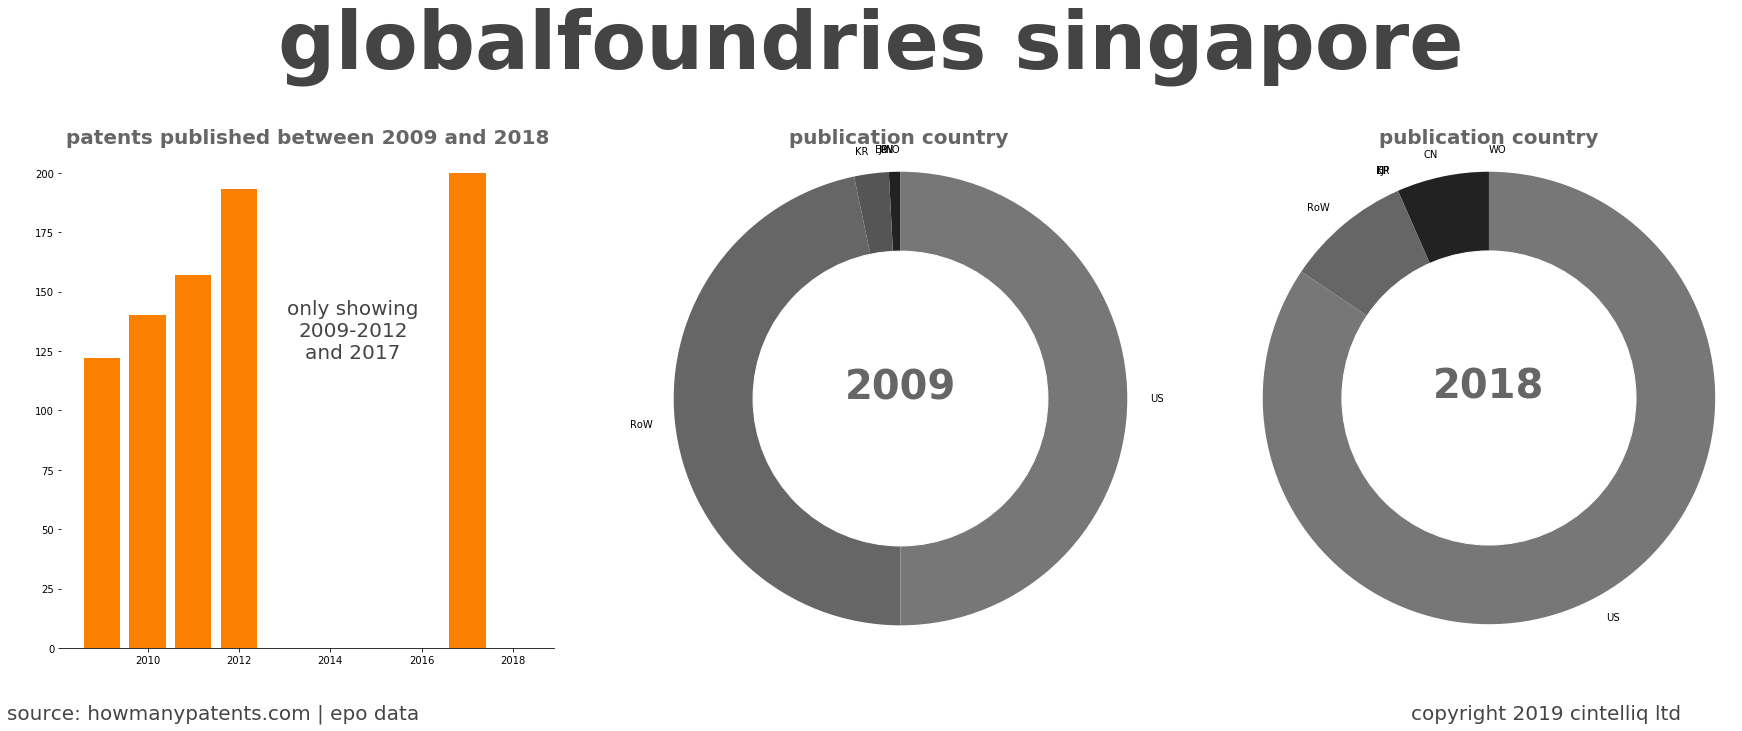 summary of patents for Globalfoundries Singapore